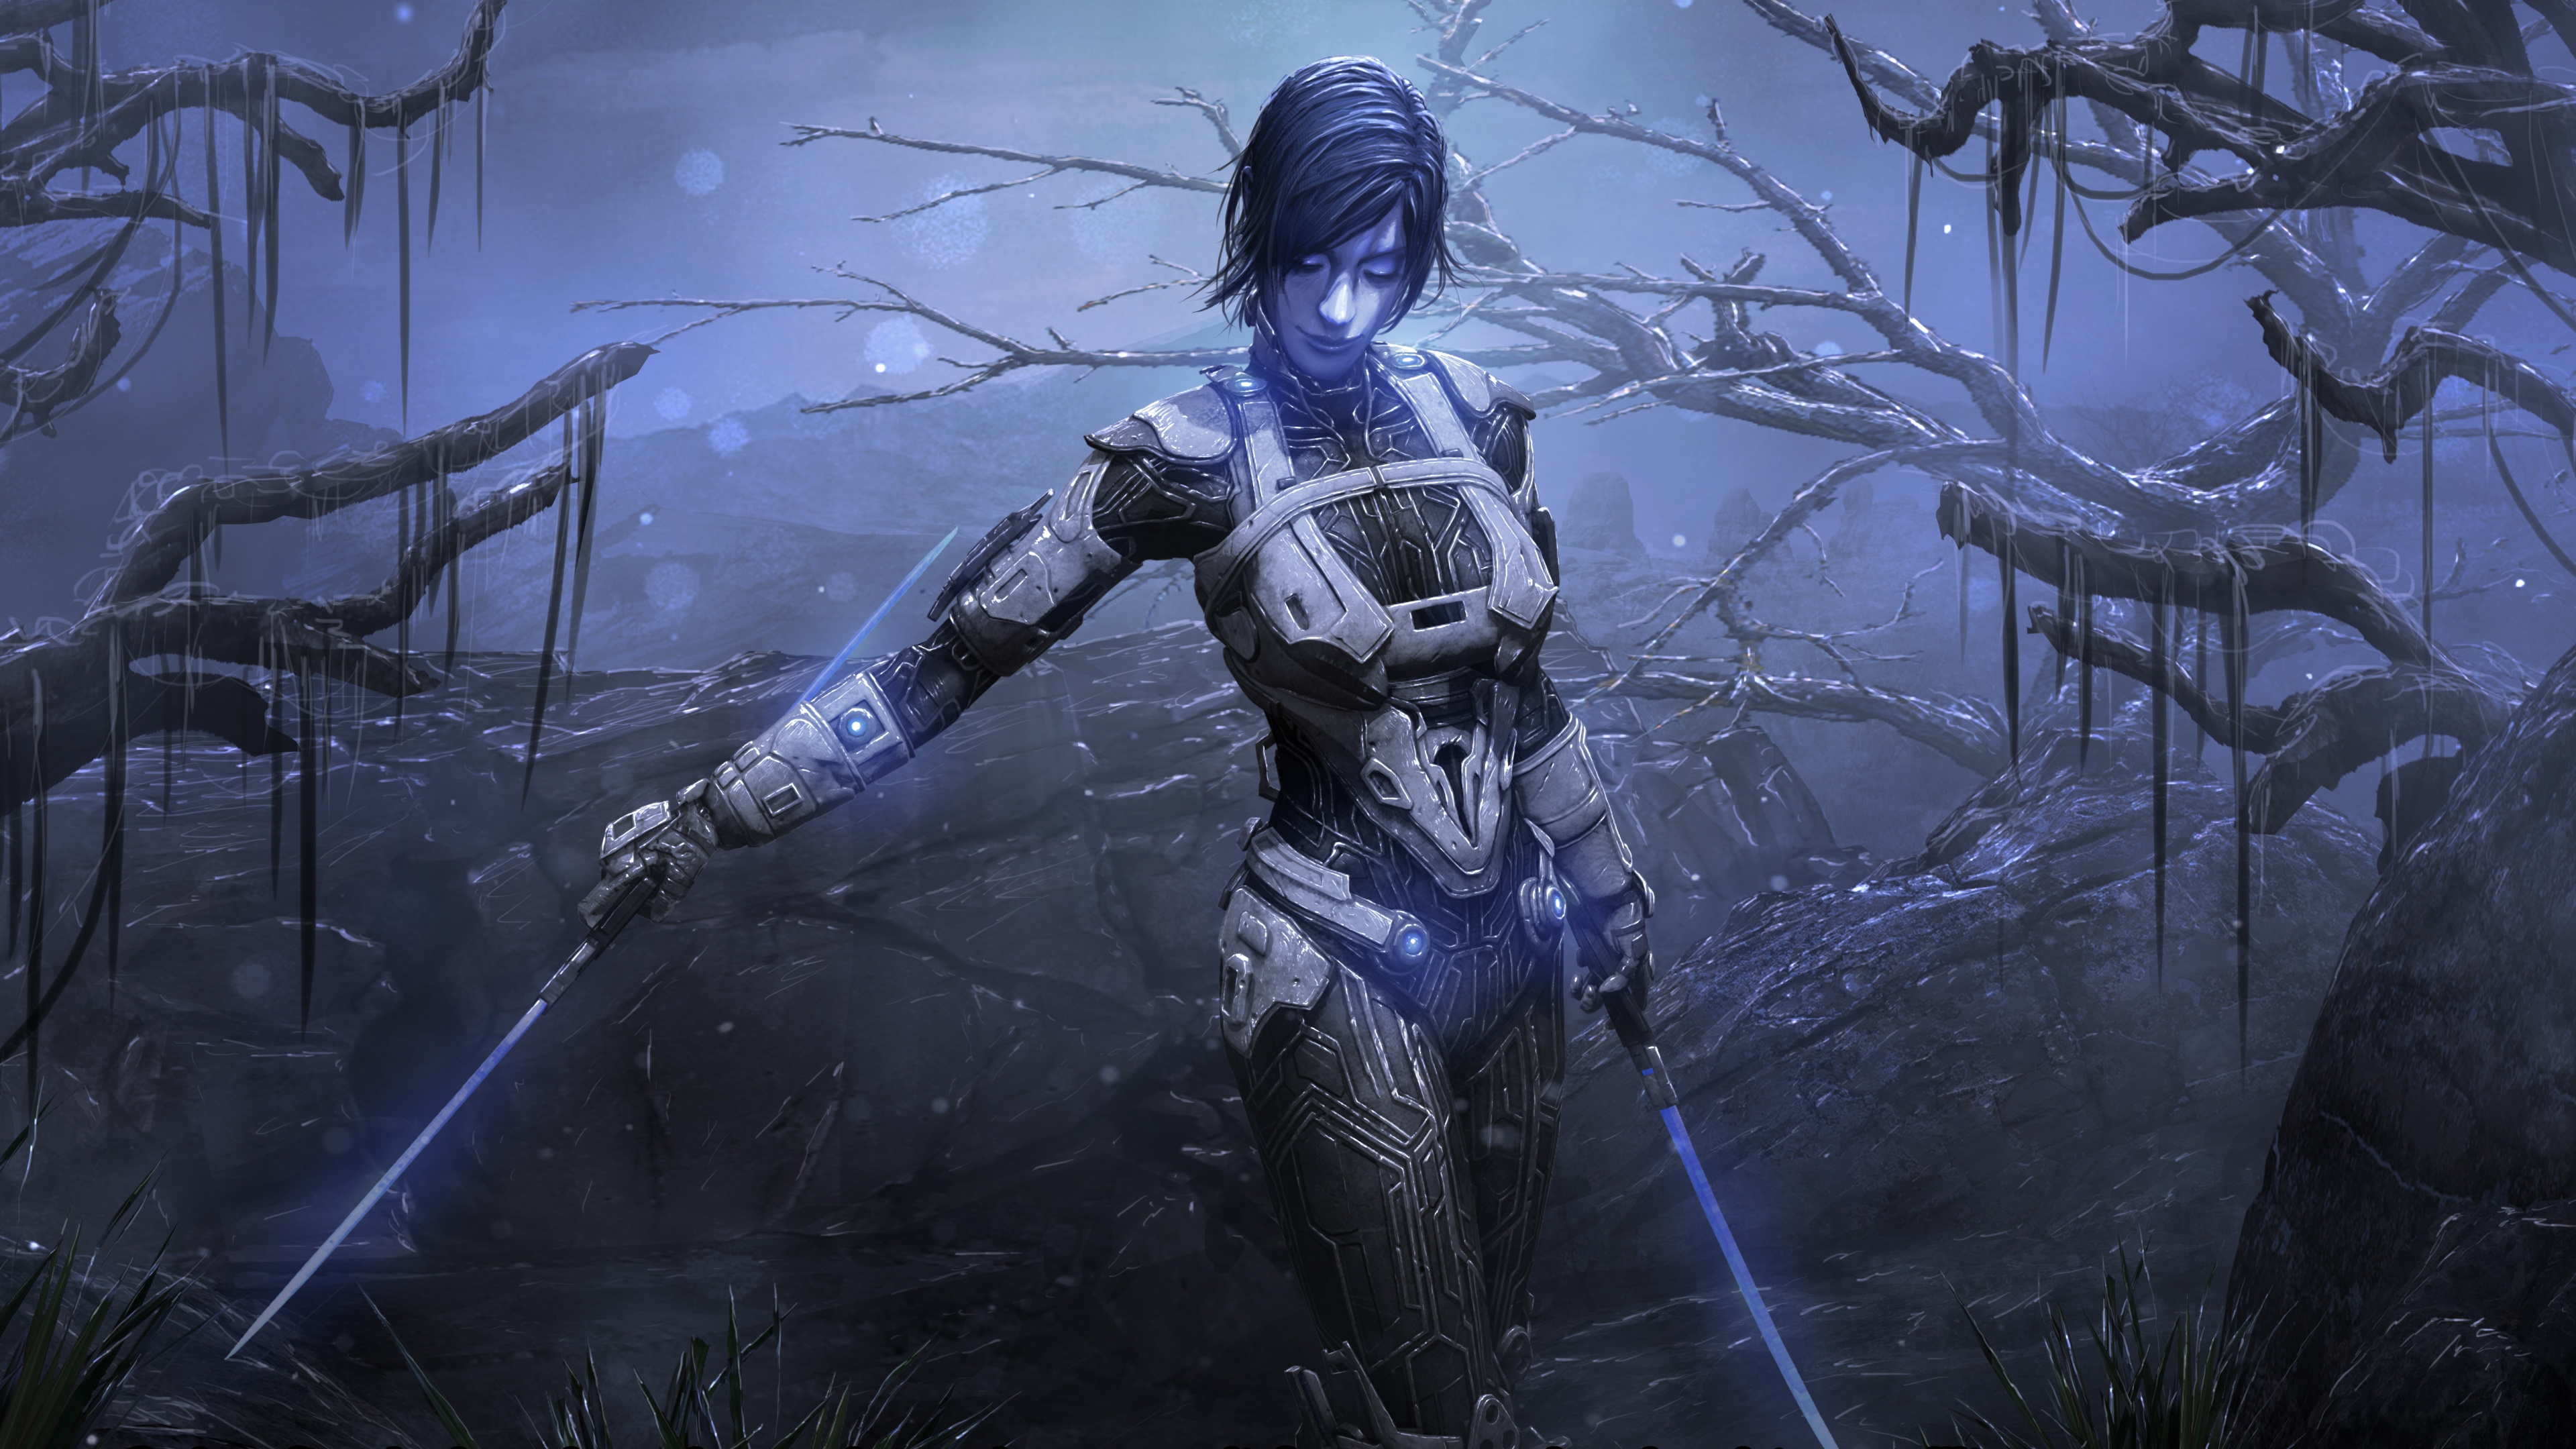 Woman in Black and Blue Suit Holding Black and Blue Weapon. Wallpaper in 3840x2160 Resolution